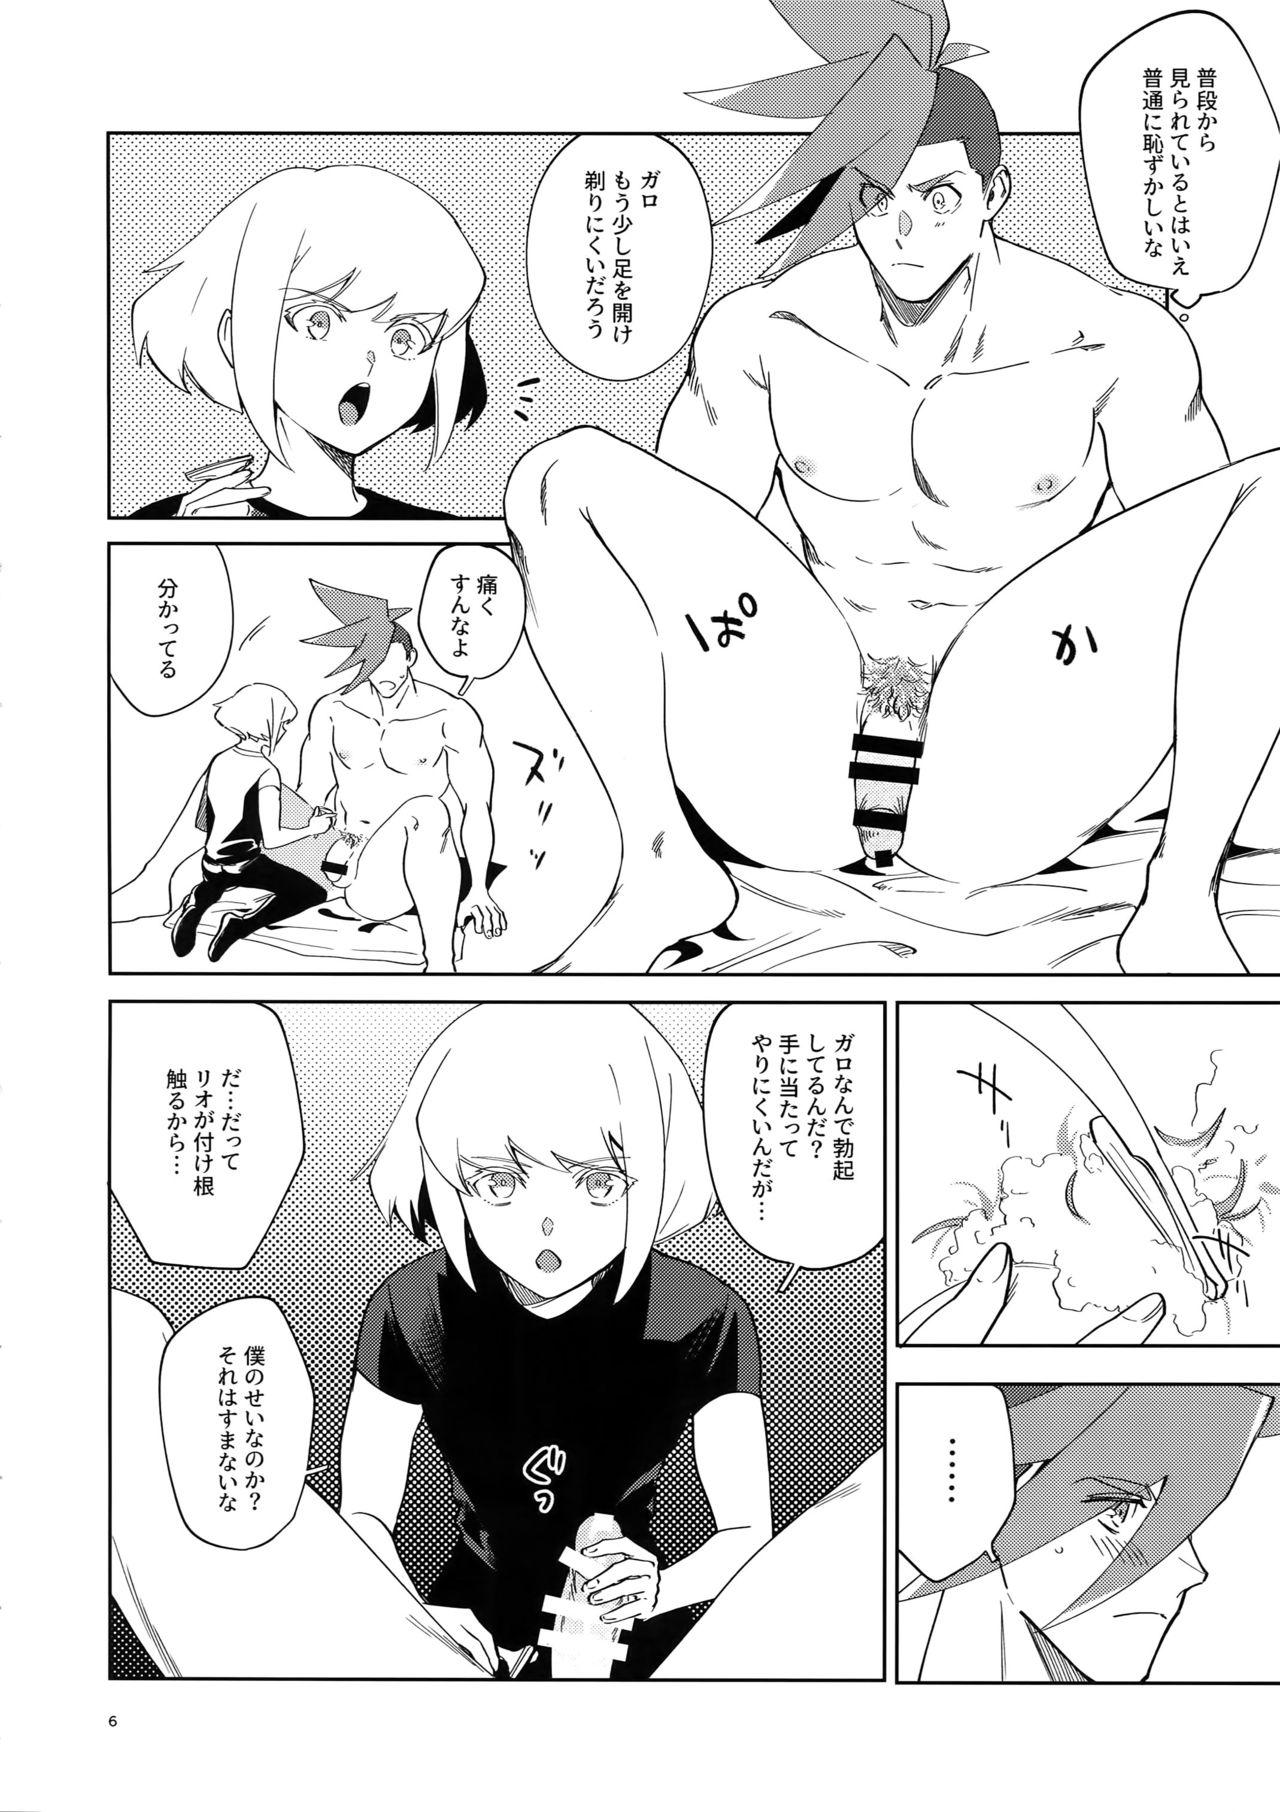 Hot Whores One and Only - Promare Thief - Page 5